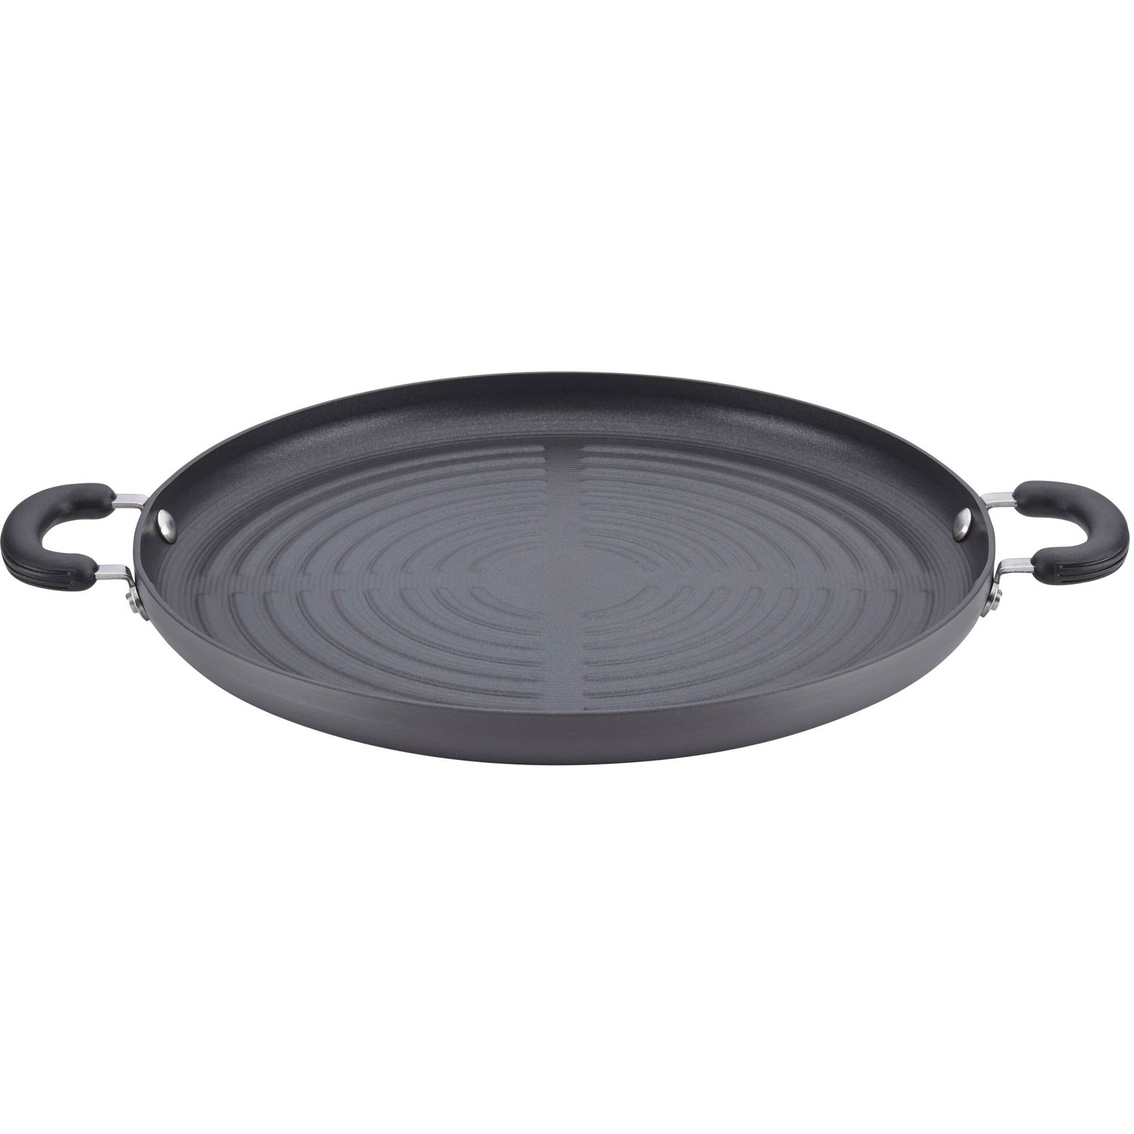 Stovetop Grill Pan - 14-inch